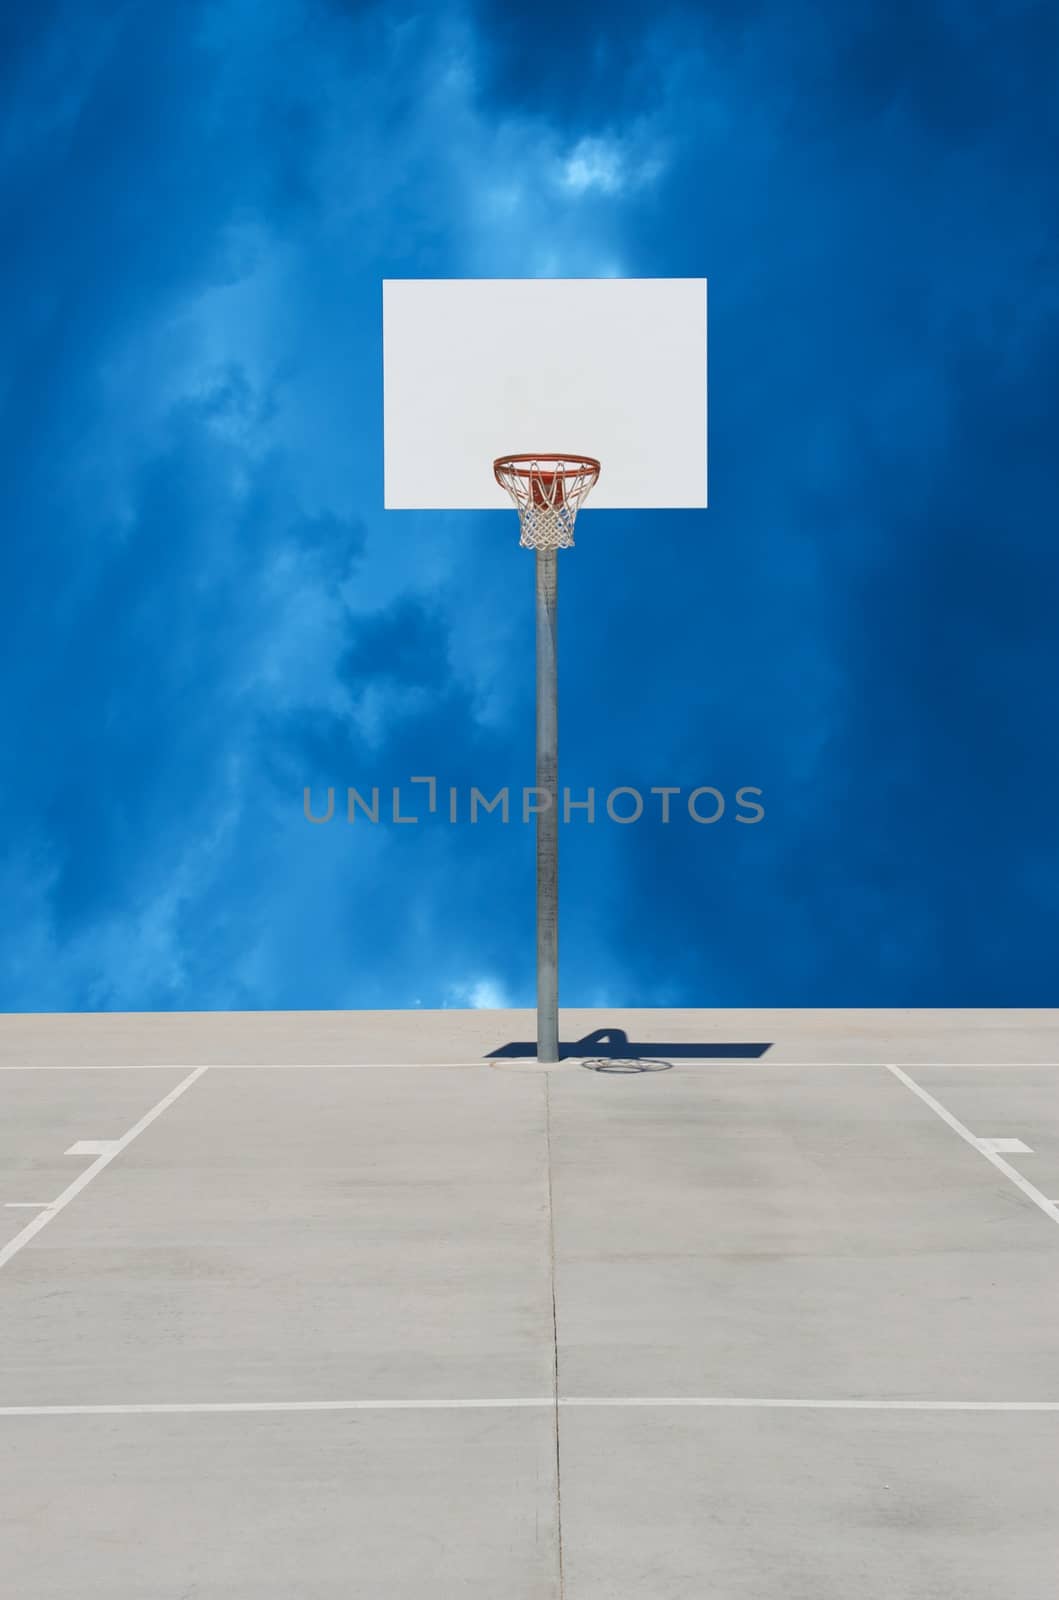 Pure White Basketball Standard or Backboard with Cloudy Background by pixelsnap